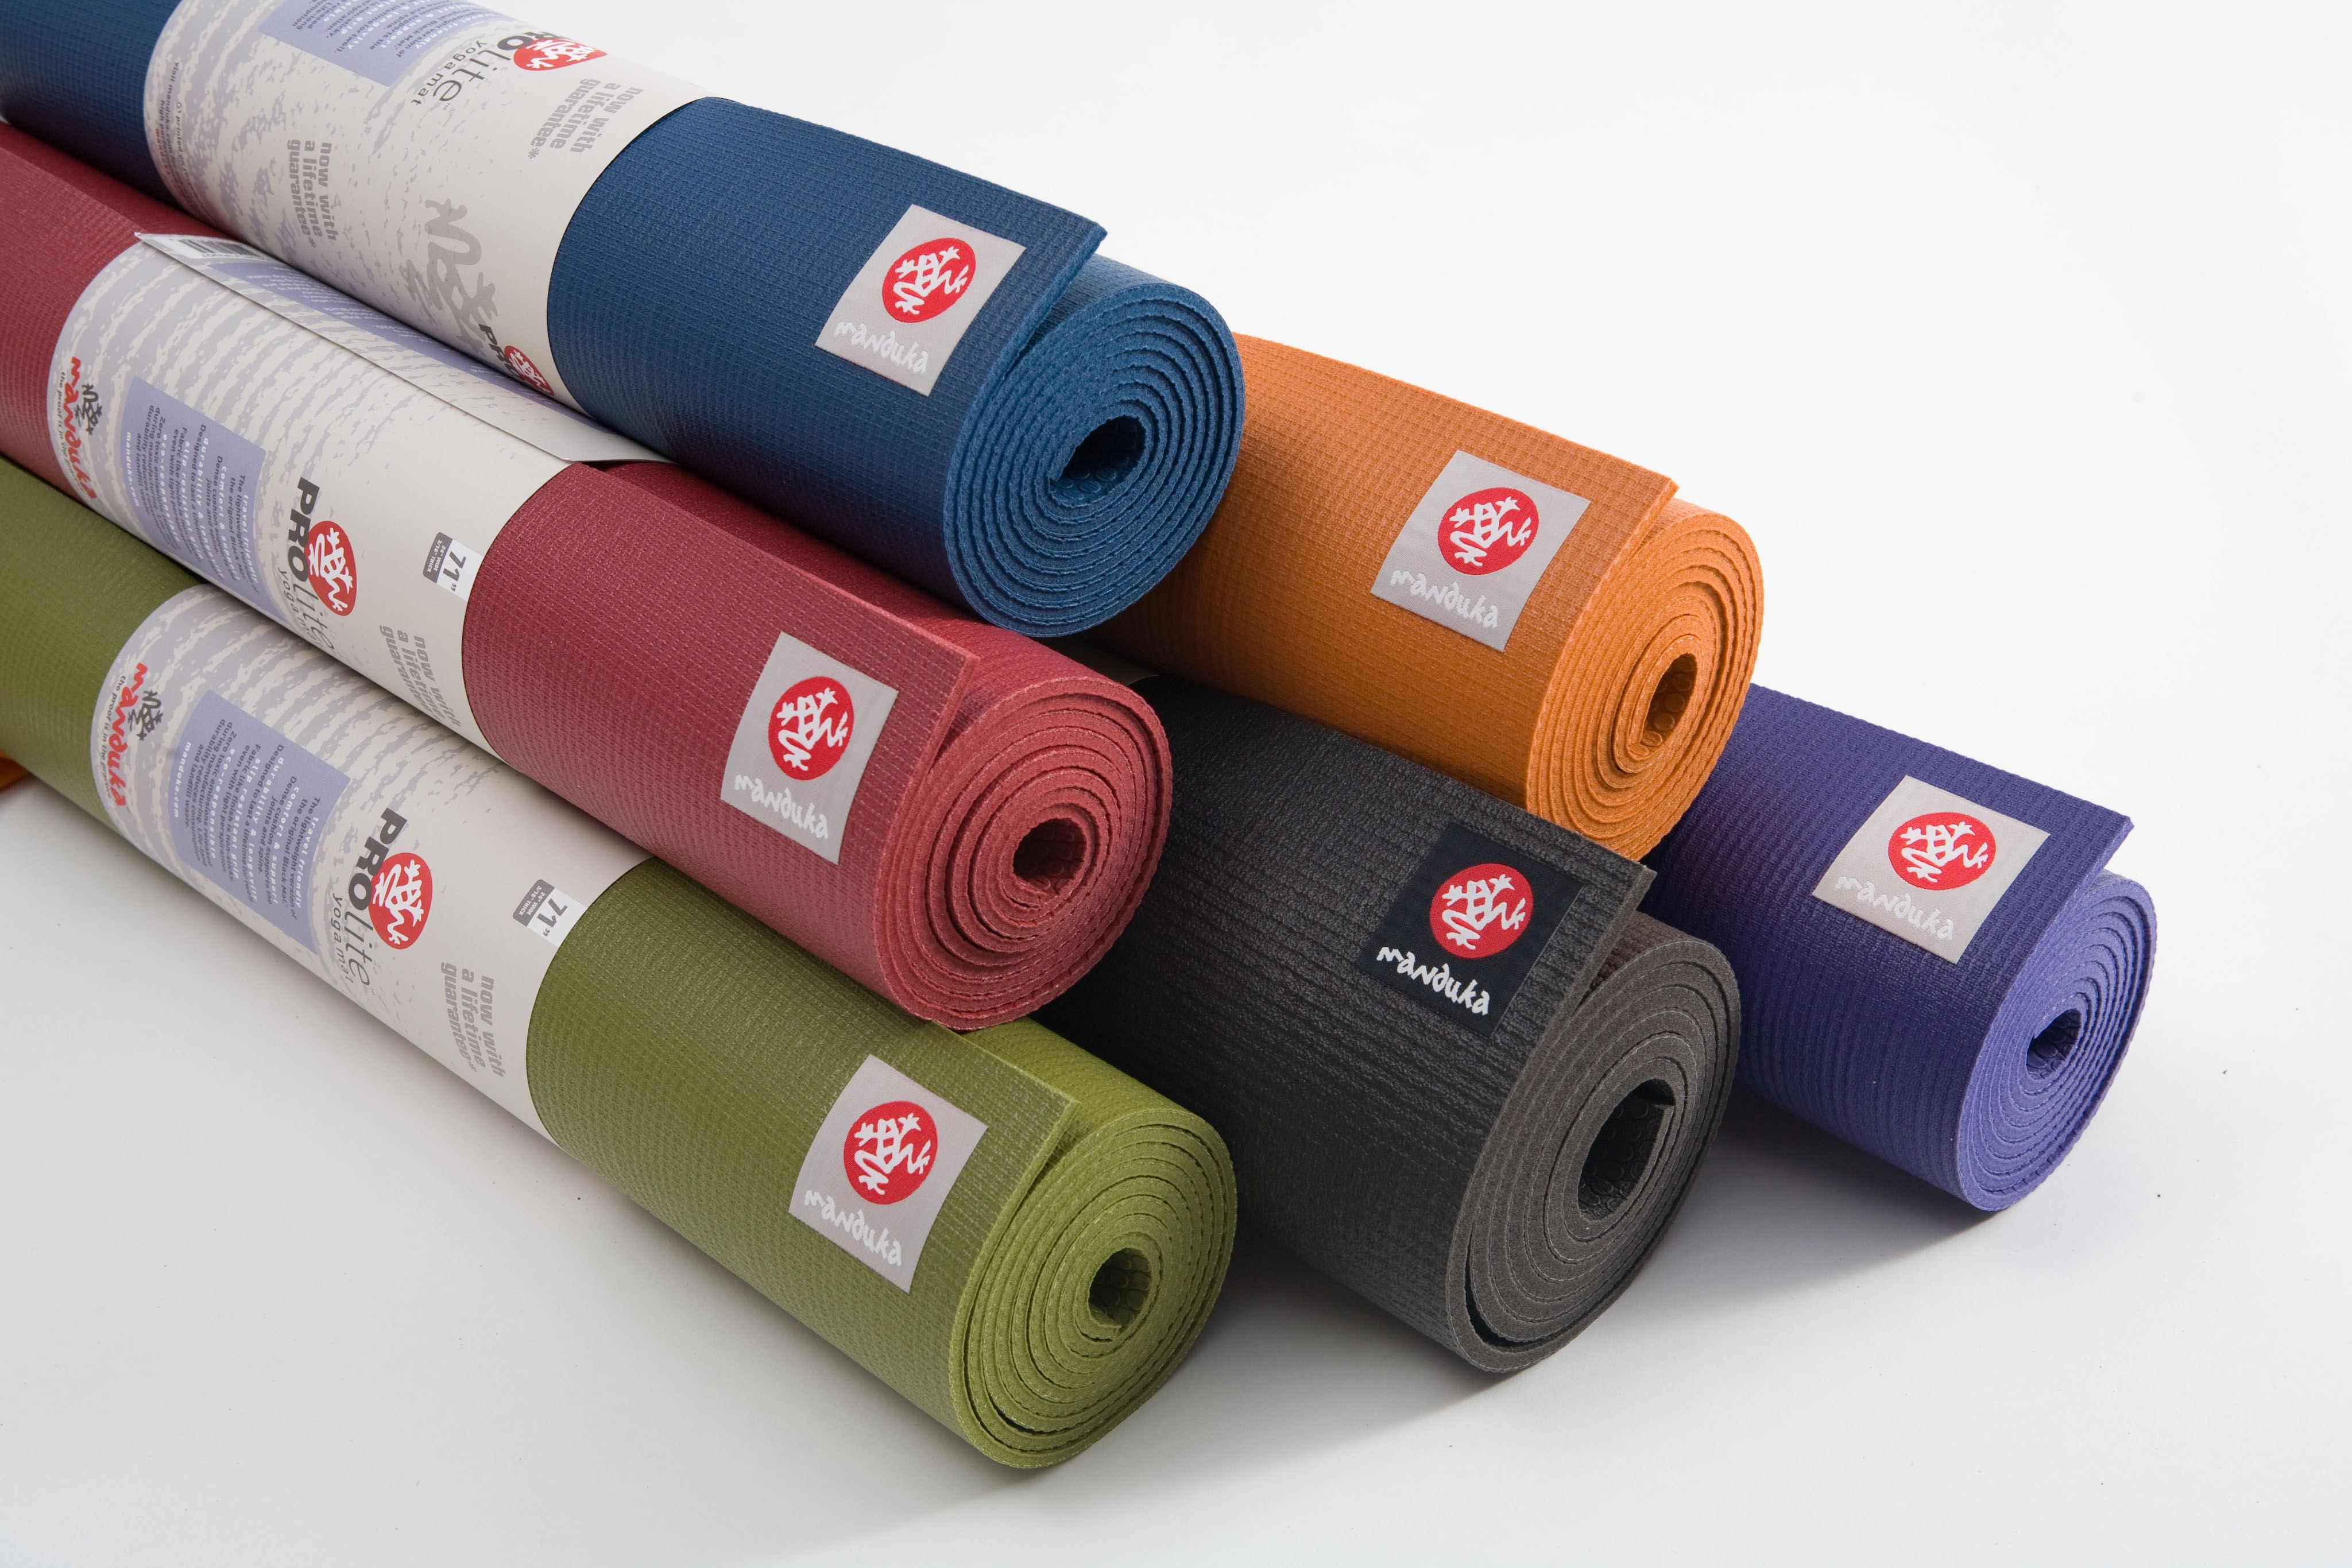 What Yoga Mat Should I Buy? A Review of some of the most popular Yoga